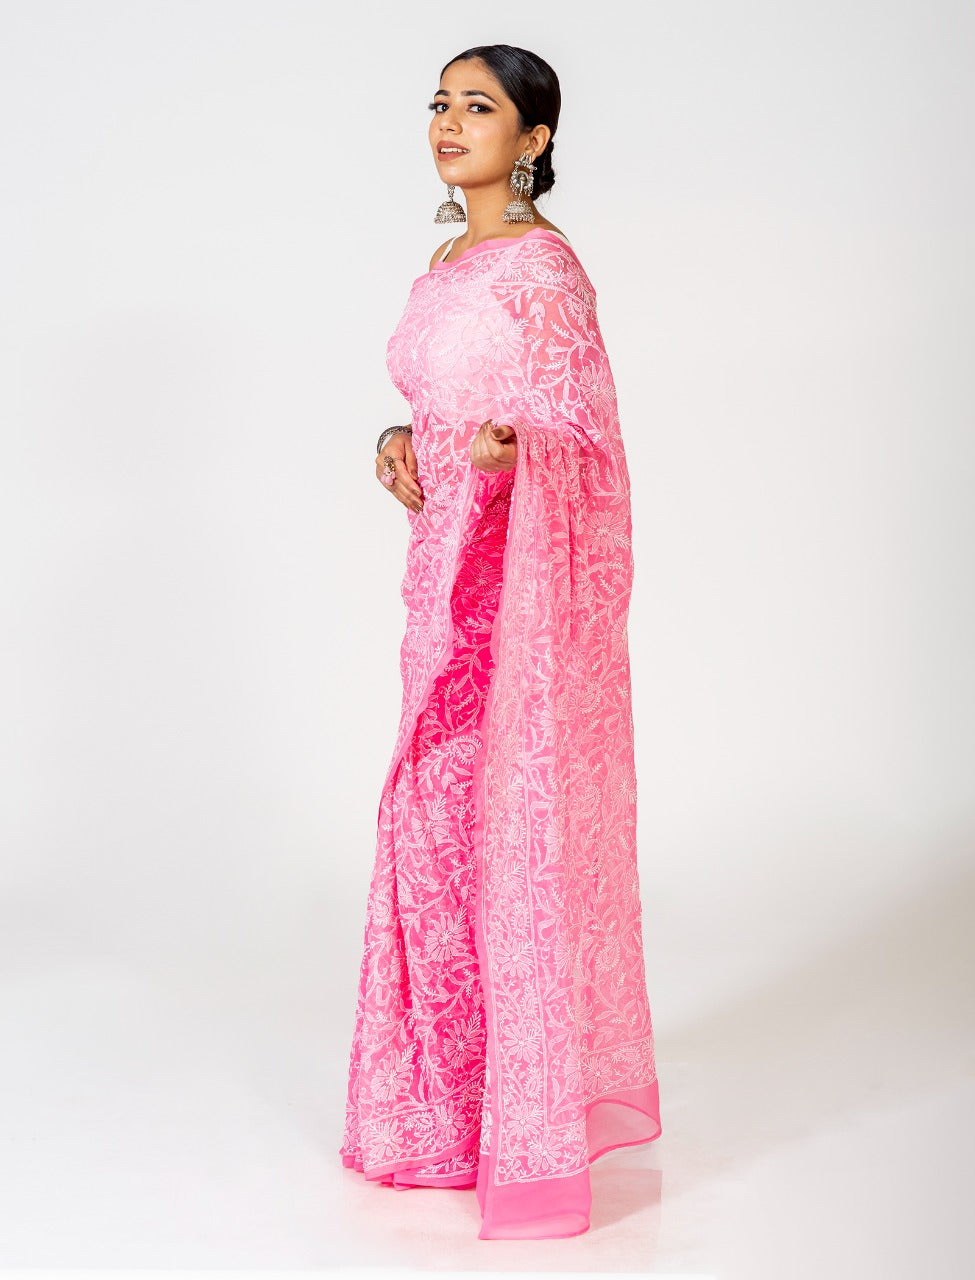 Lucknow Chikan Emporium Cotton Saree Pink Colour With Same Colour Blouse piece included.